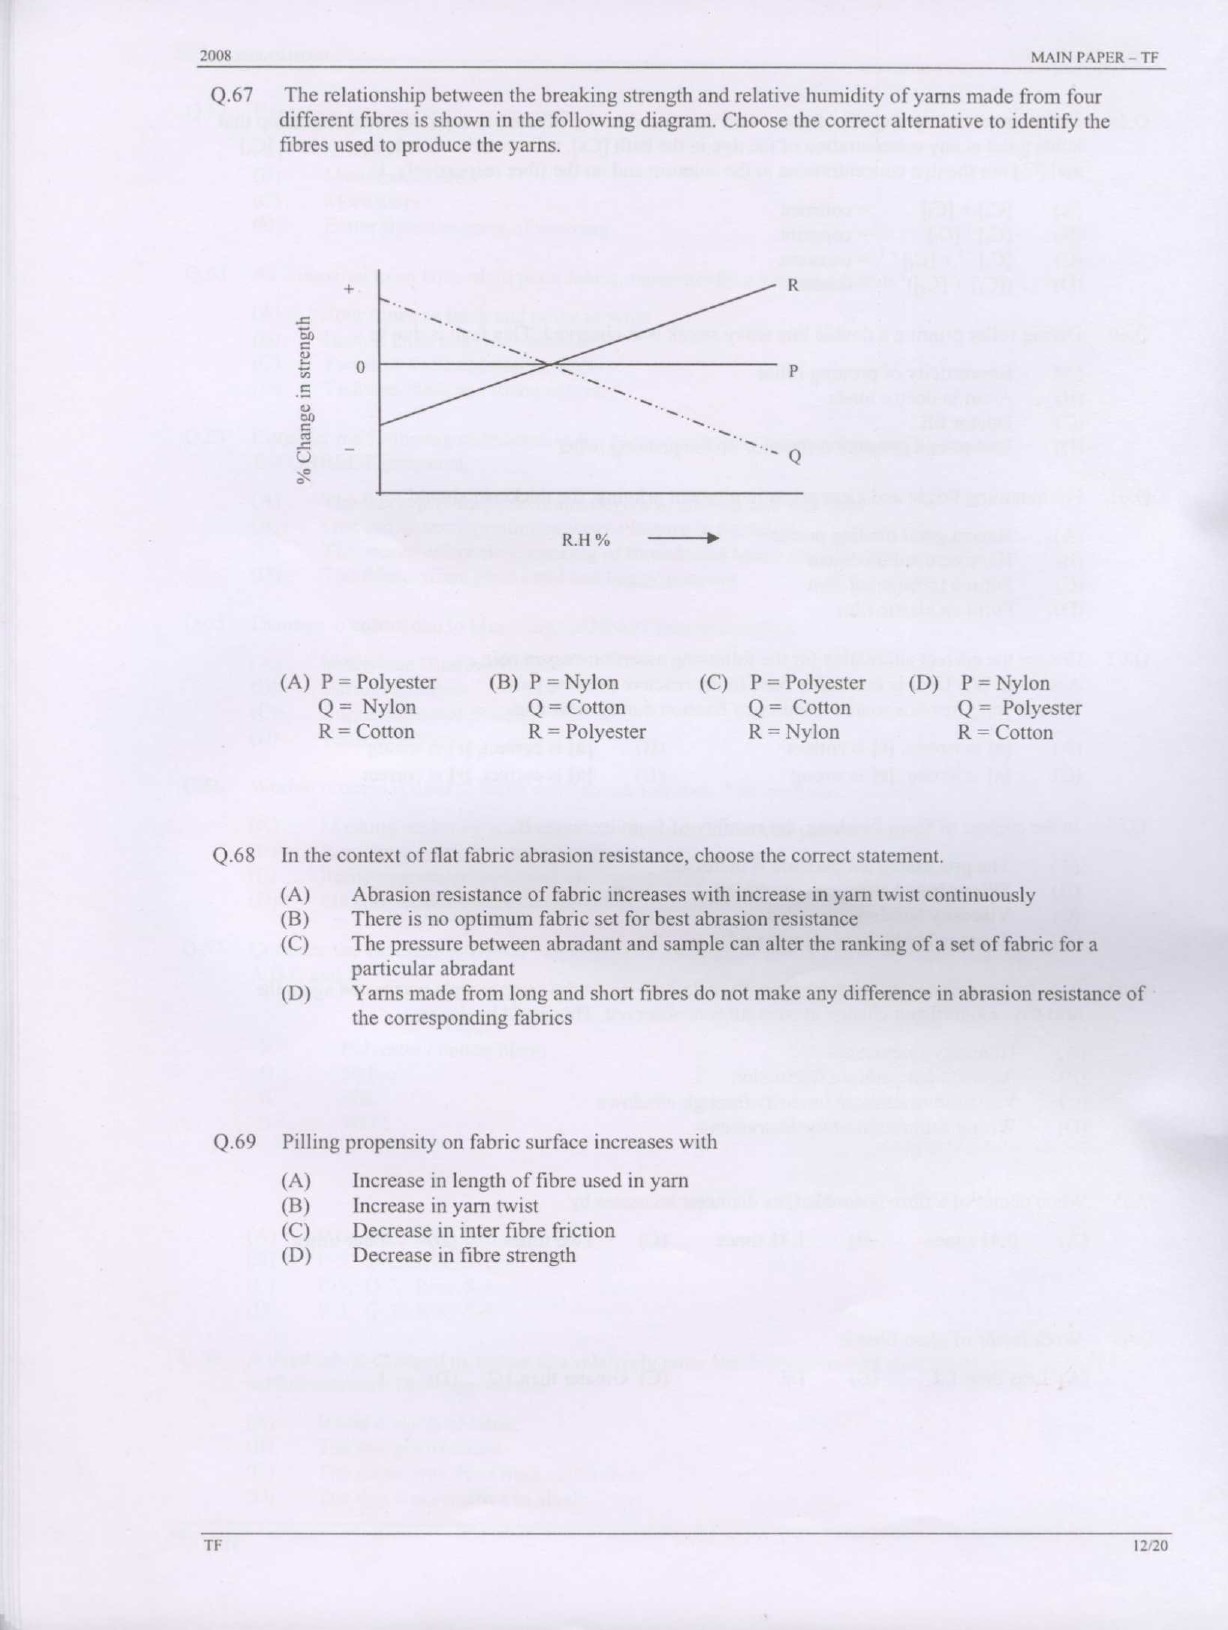 GATE Exam Question Paper 2008 Textile Engineering and Fibre Science 12